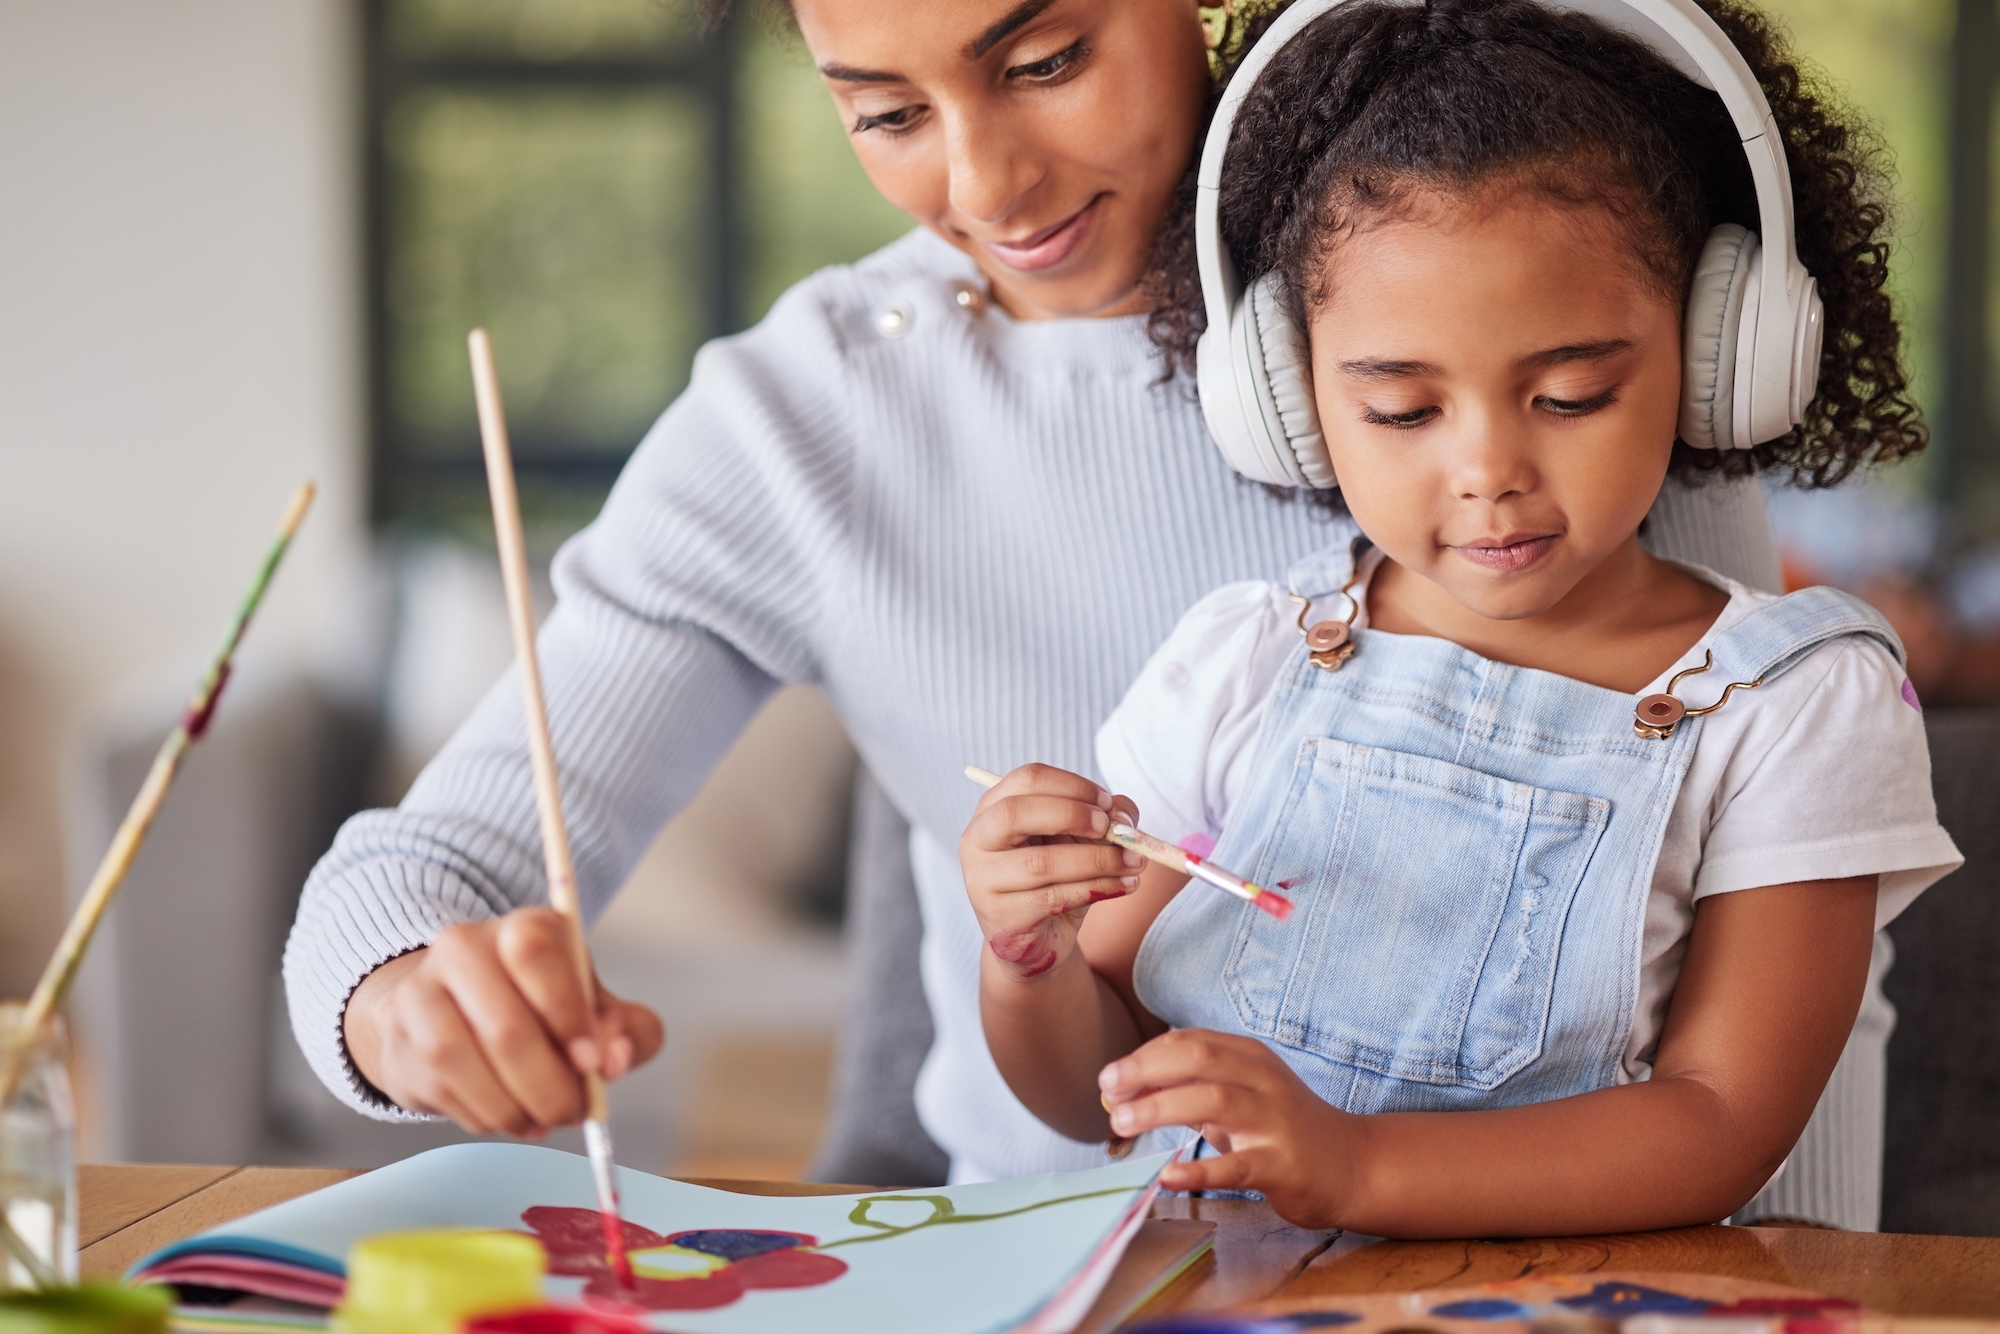 Child and parent paint together, child is wearing headphones